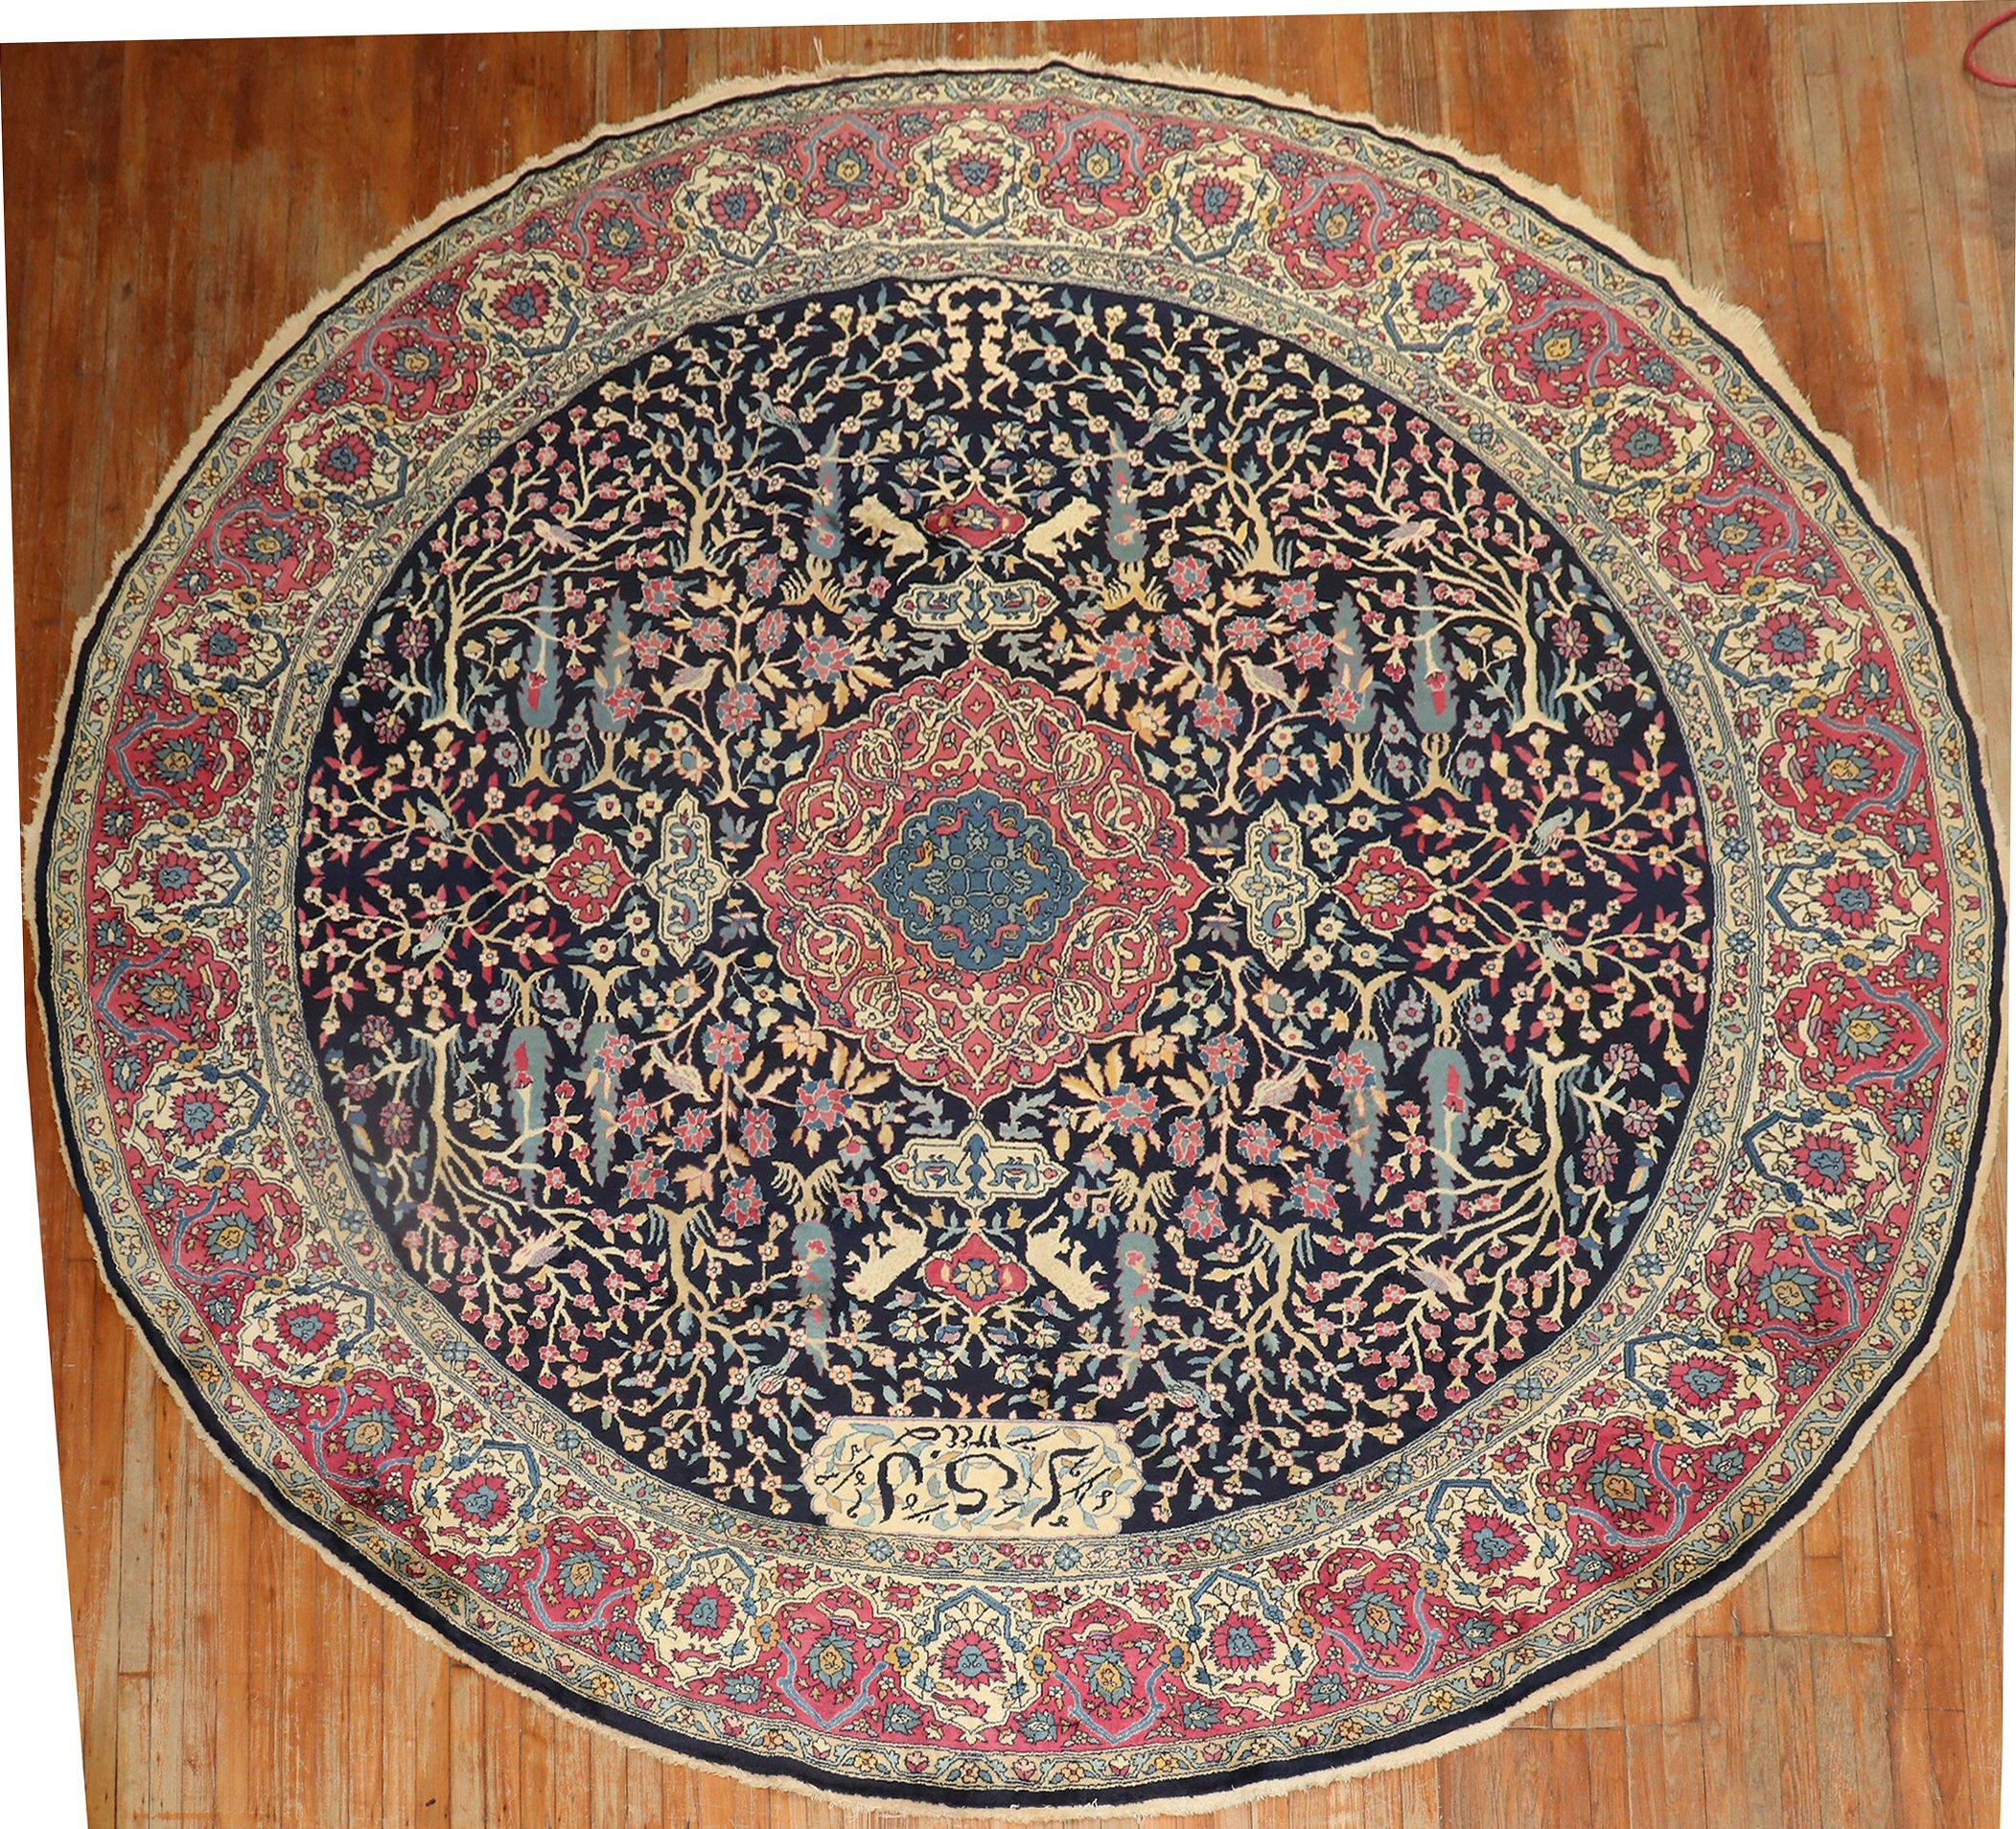 Rare Signed antique Indian round rug with a formal pictorial animal design.

Measures: 10'10'' x 10'11''.